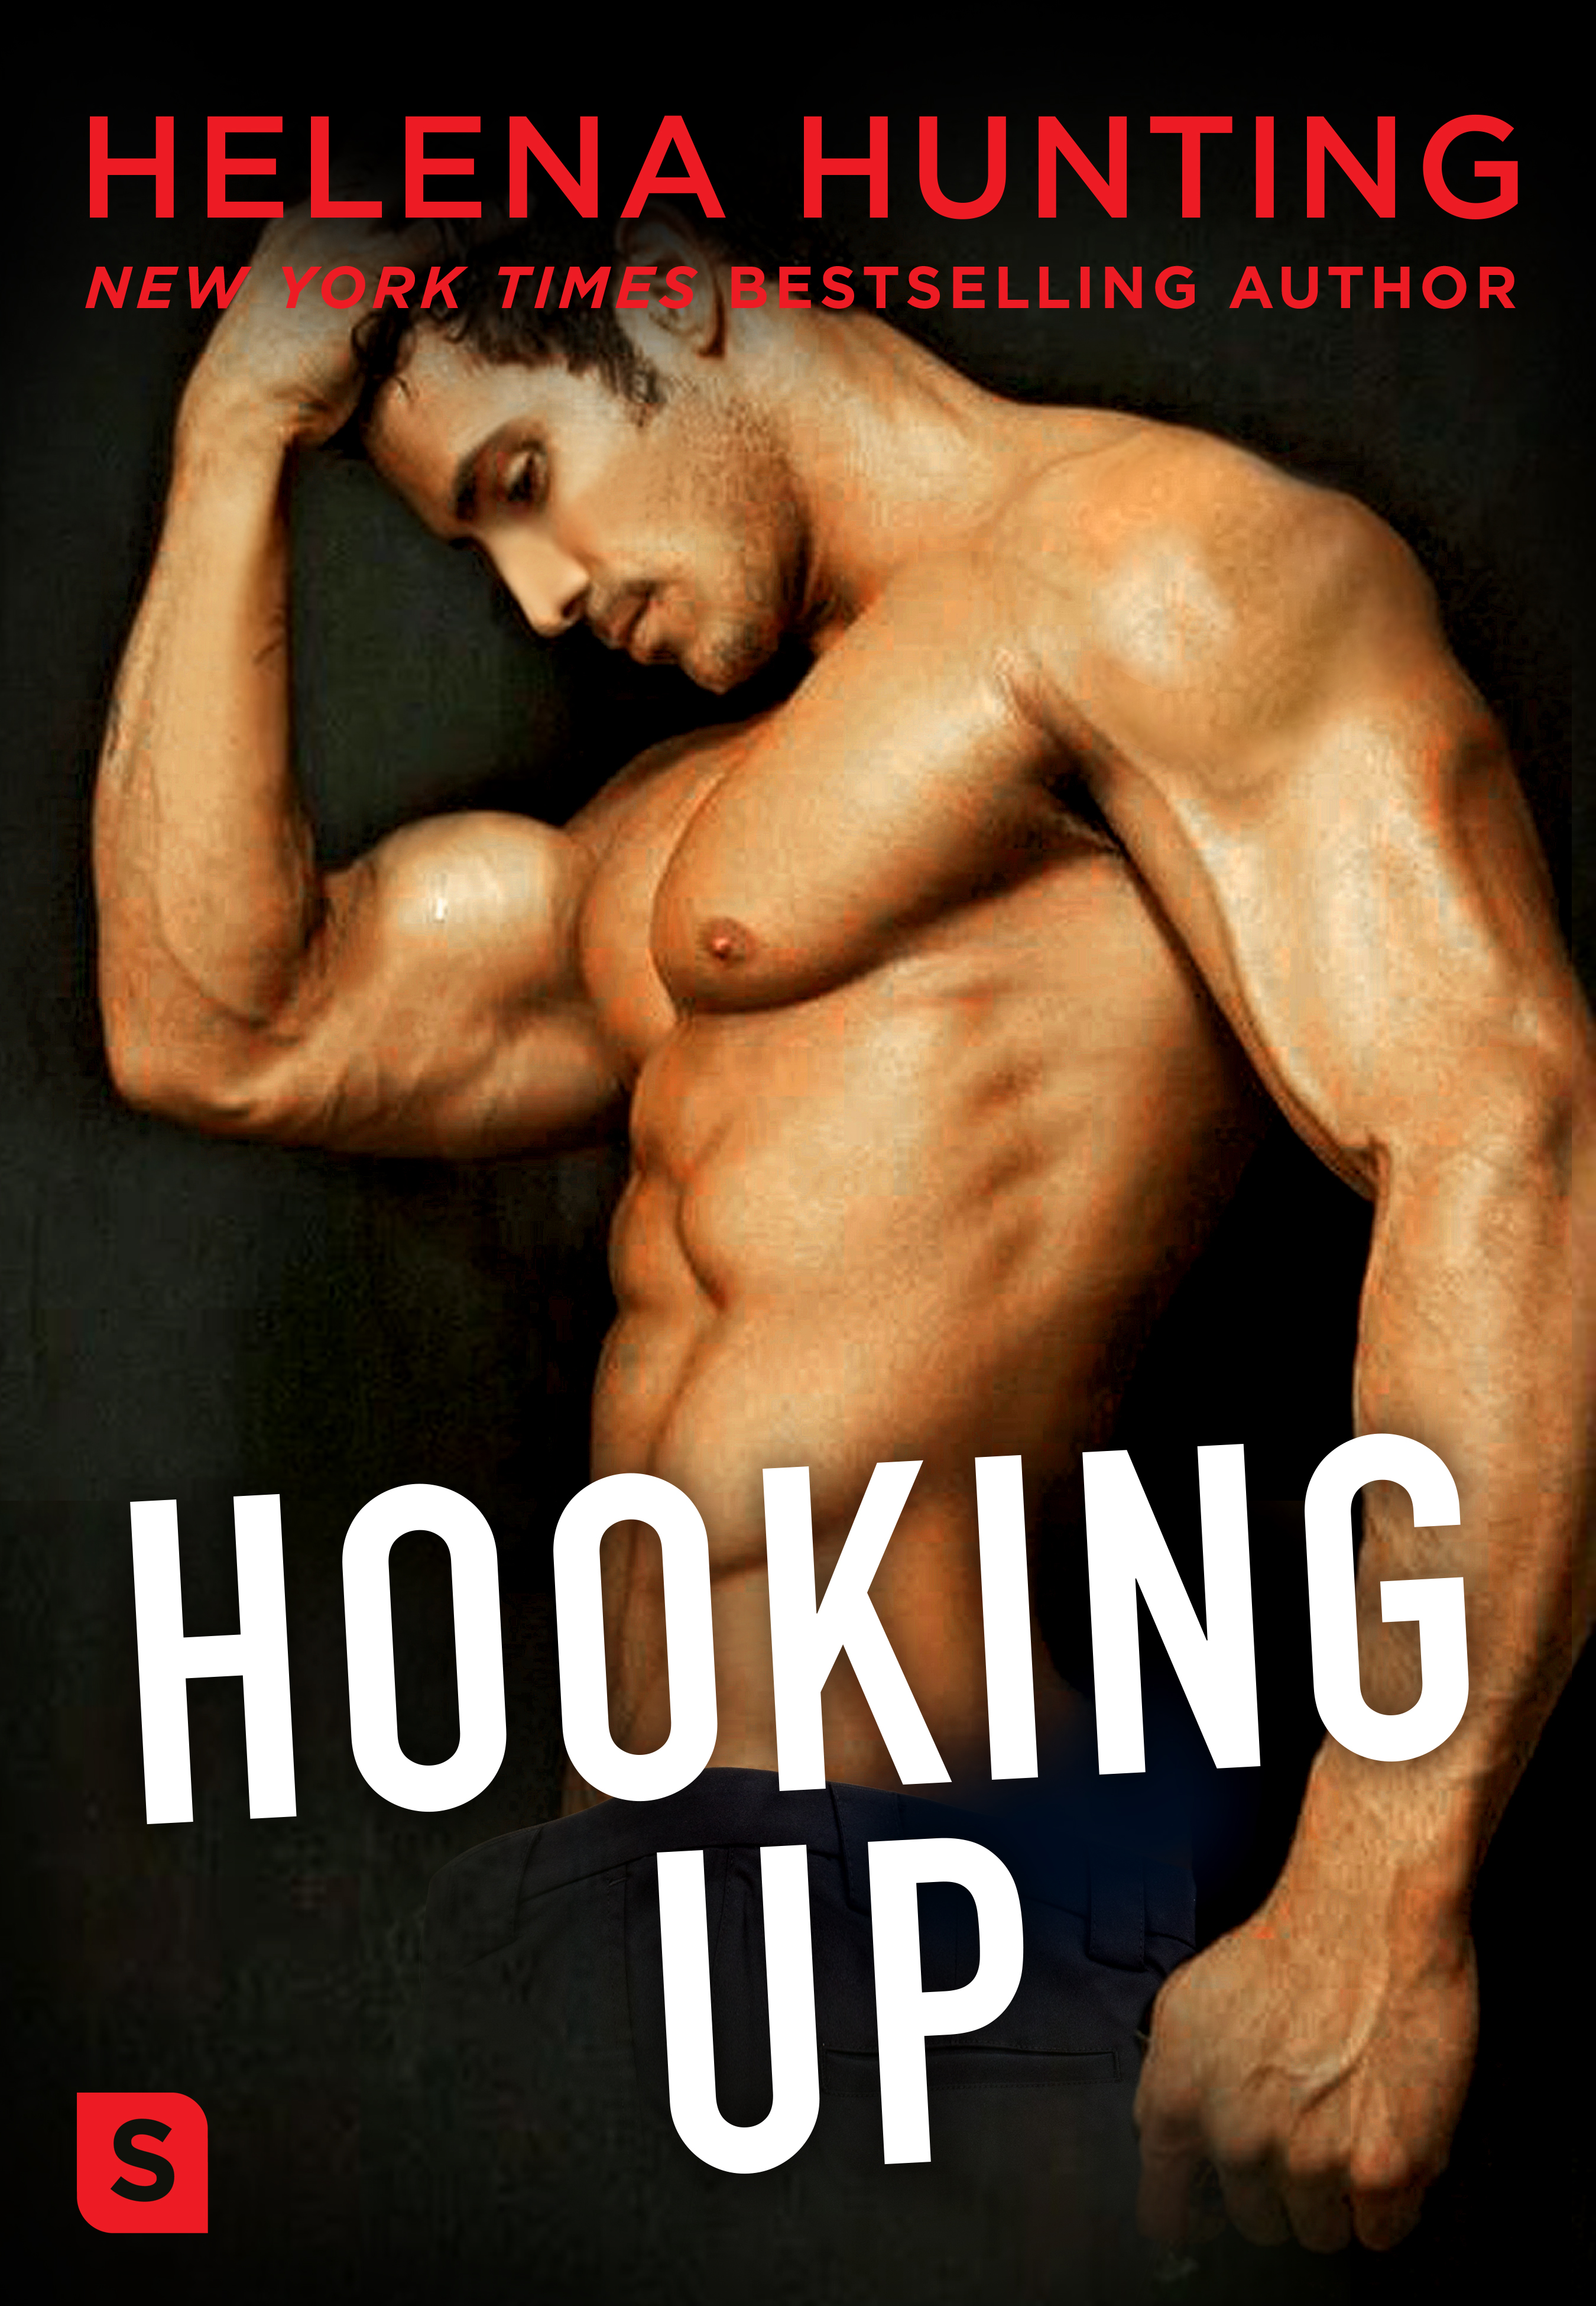 Cover Reveal & Countdown Timer: HOOKING UP by Helena Hunting